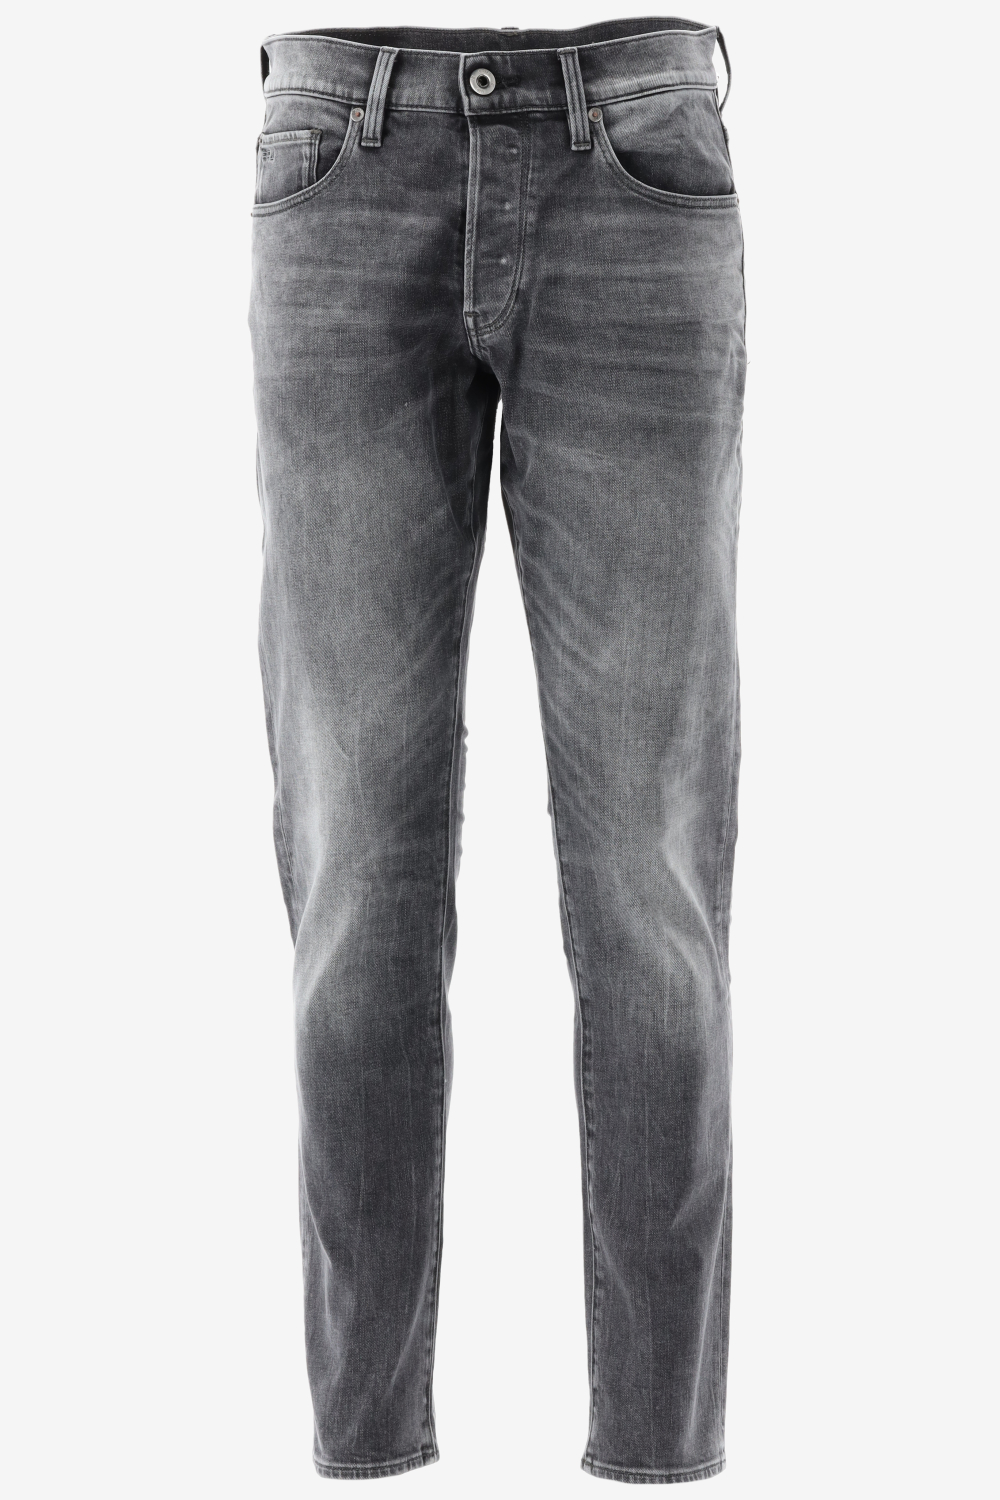 G Star Tapered Fit 3301 REGULAR TAPERED